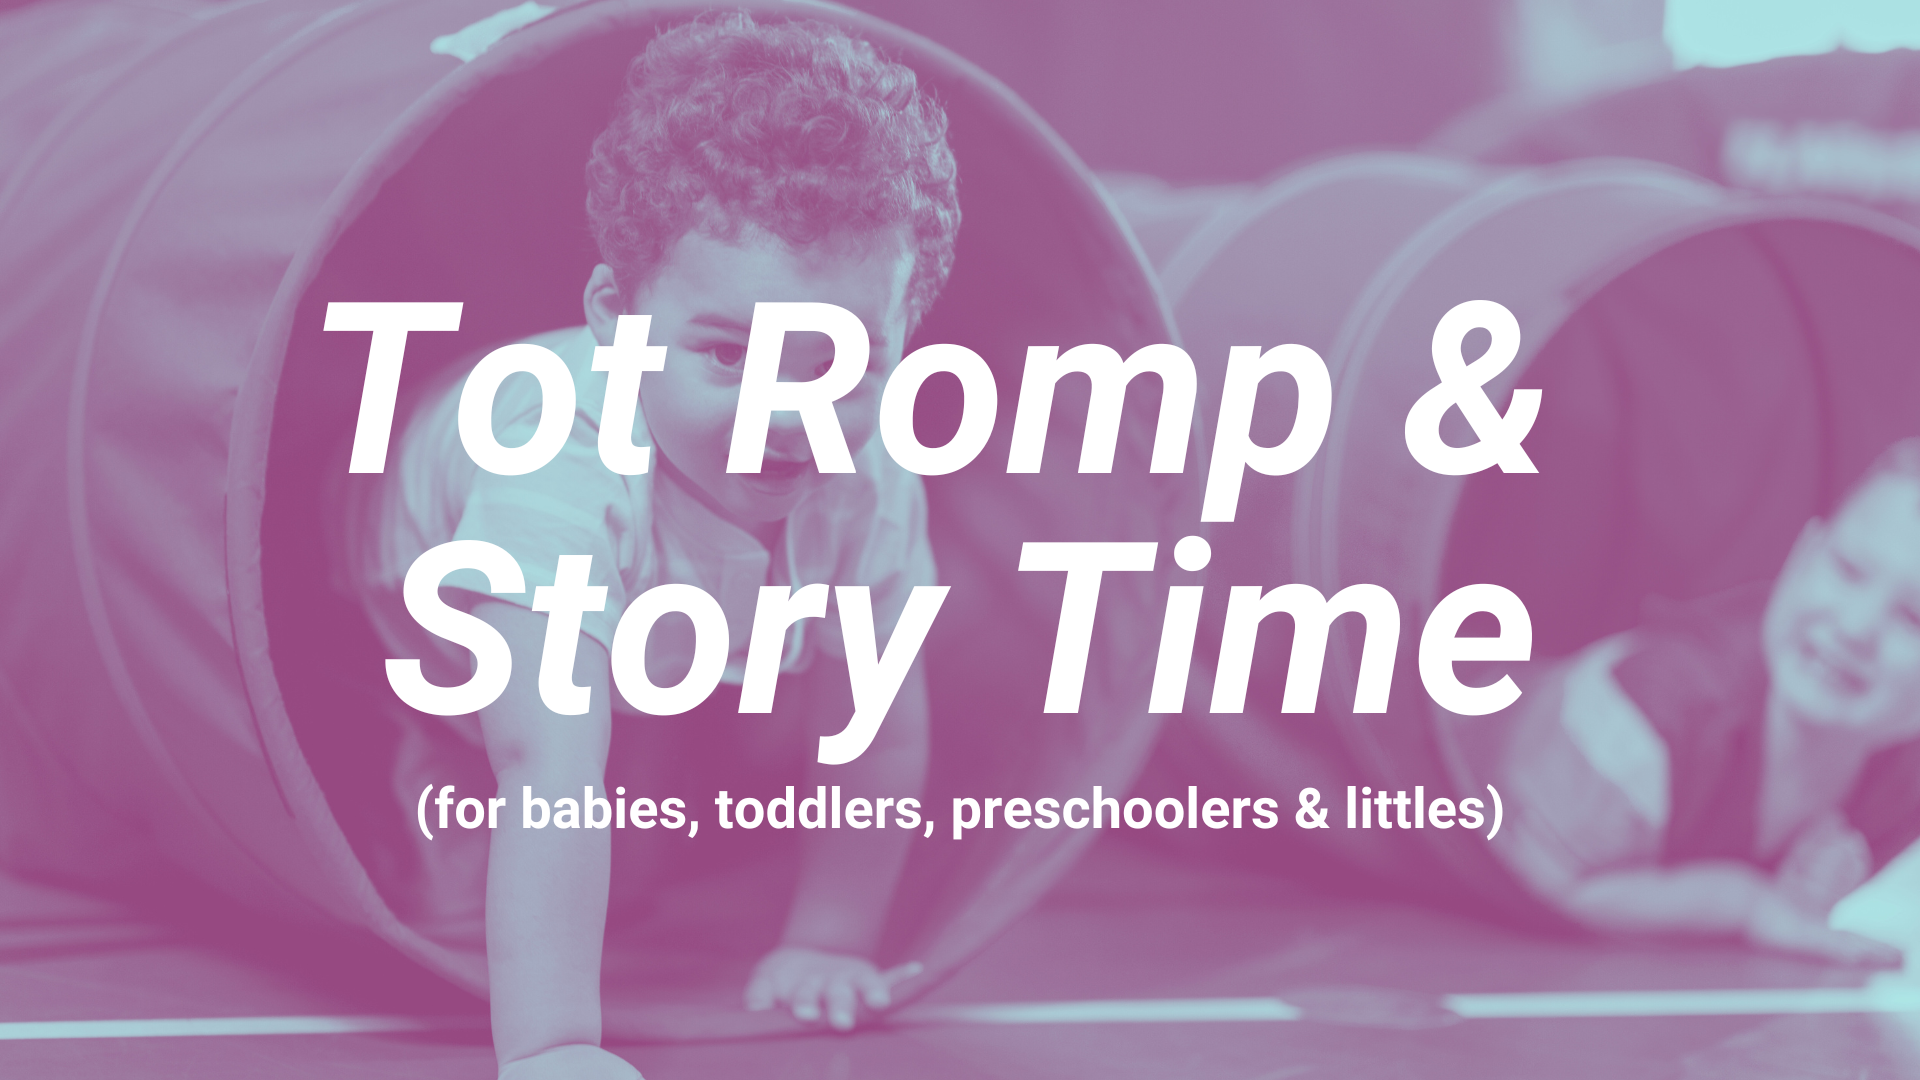 Tot Romp & Story Time (for babies, toddlers, preschoolers & littles)